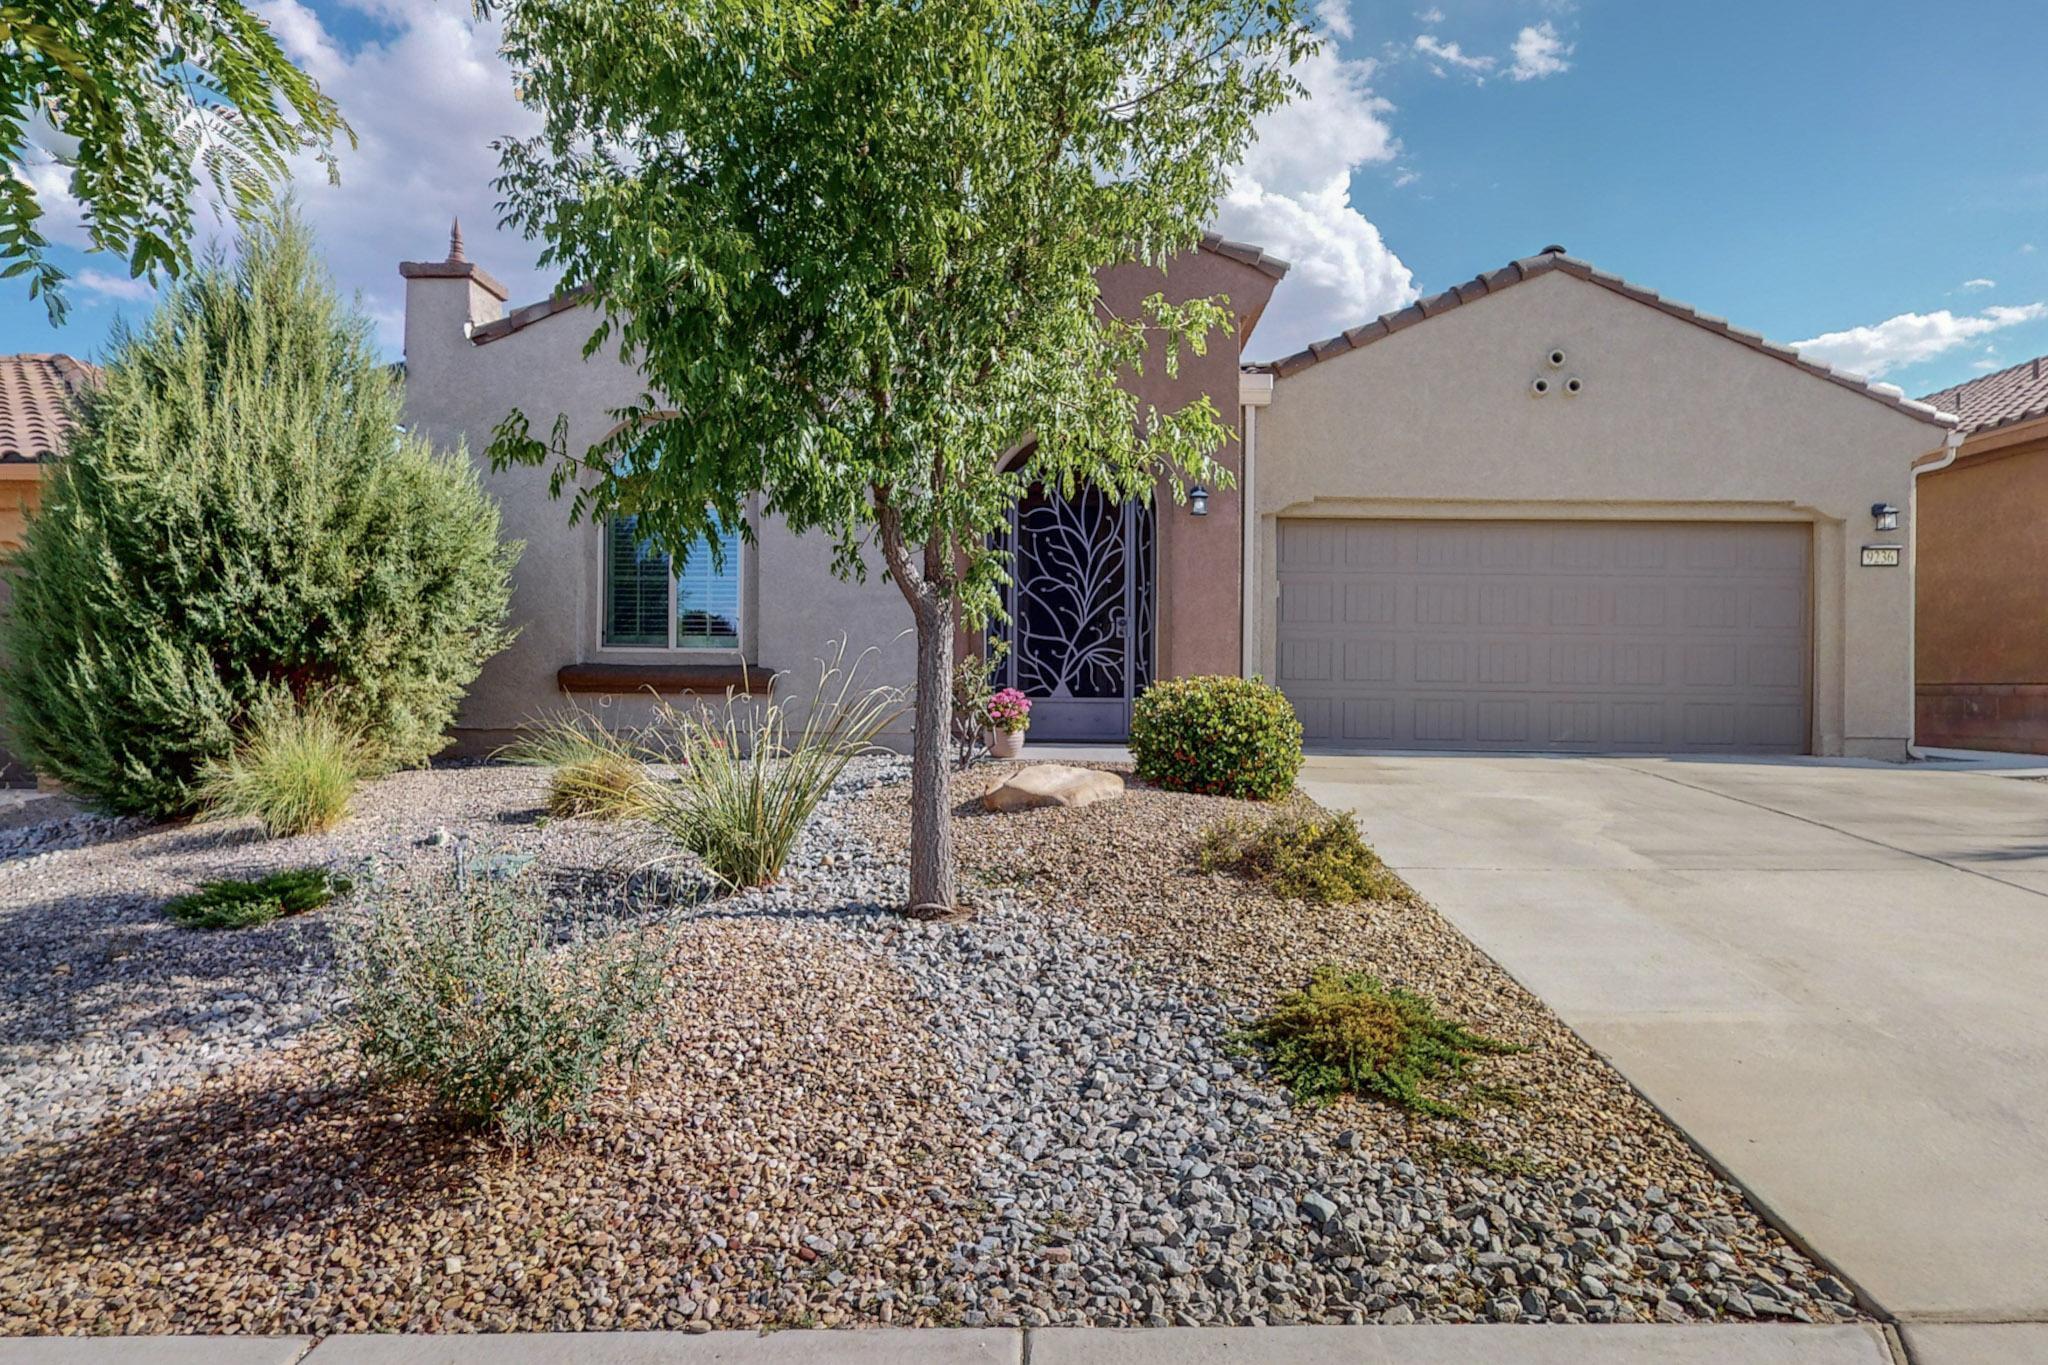 Beautiful Home In Del Webb Mirehaven, A 55+ Active Adult Community! This 'Preserve' floorplan is 2125 SF and has 2 BR's, 2 BA's, Office or Den w/French Doors, 2 Car Garage with additional storage area, Custom Arched Iron Security gate at Entry way, Gorgeous Kitchen w/Roll Outs, Huge Island, Granite Countertops, Gas Cooktop, Large Pantry,  Barn Door at Primary Bath, Large Walk in Shower w/tile surround & grab bars, Plantation Shutters and Blinds Throughout, Enclosed Screened Patio, Gas Stub out for future BBQ, Nicely Landscaped Easy Maintenance Front and Back Yards w/Drip System. Much of the Furniture is Negotiable! Enjoy the Sandia Amenity Center complete with Pickle Ball & Tennis Courts, Full Gym, Outdoor Pool, Large Gathering Room, Daily Activities and so much more!!